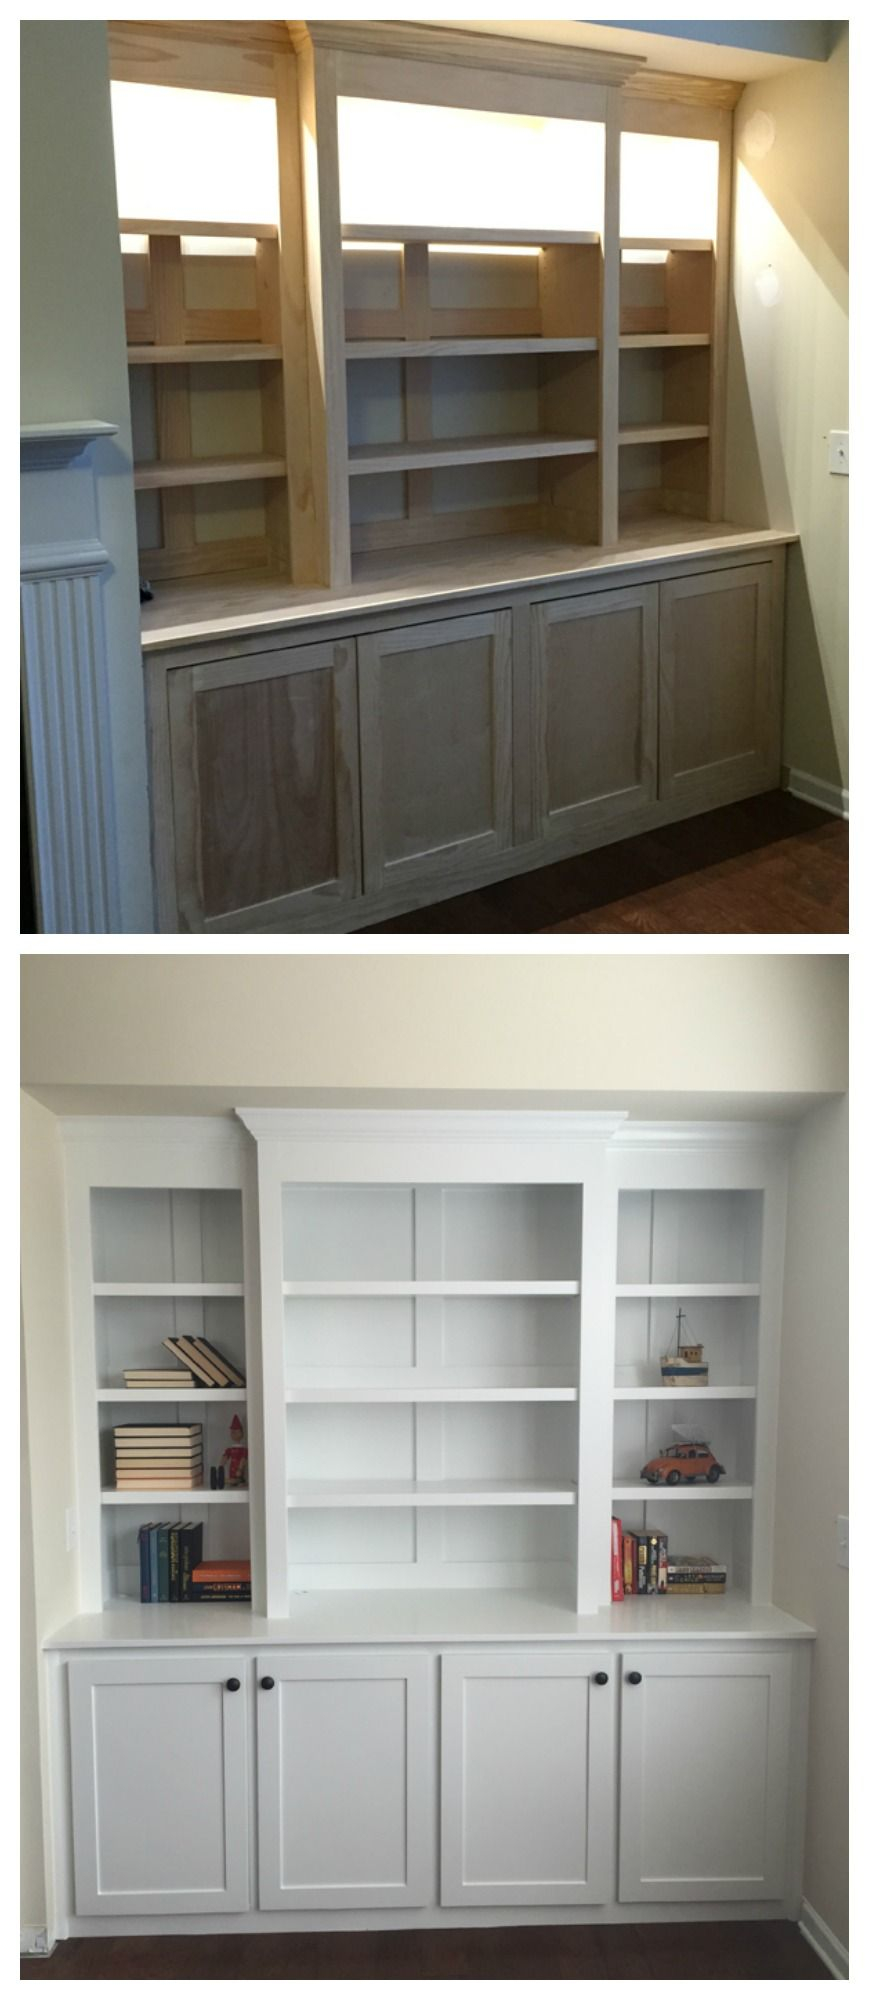 Amazing Diy Built In Buffet Shelving From Plywood And Pine within size 869 X 2000